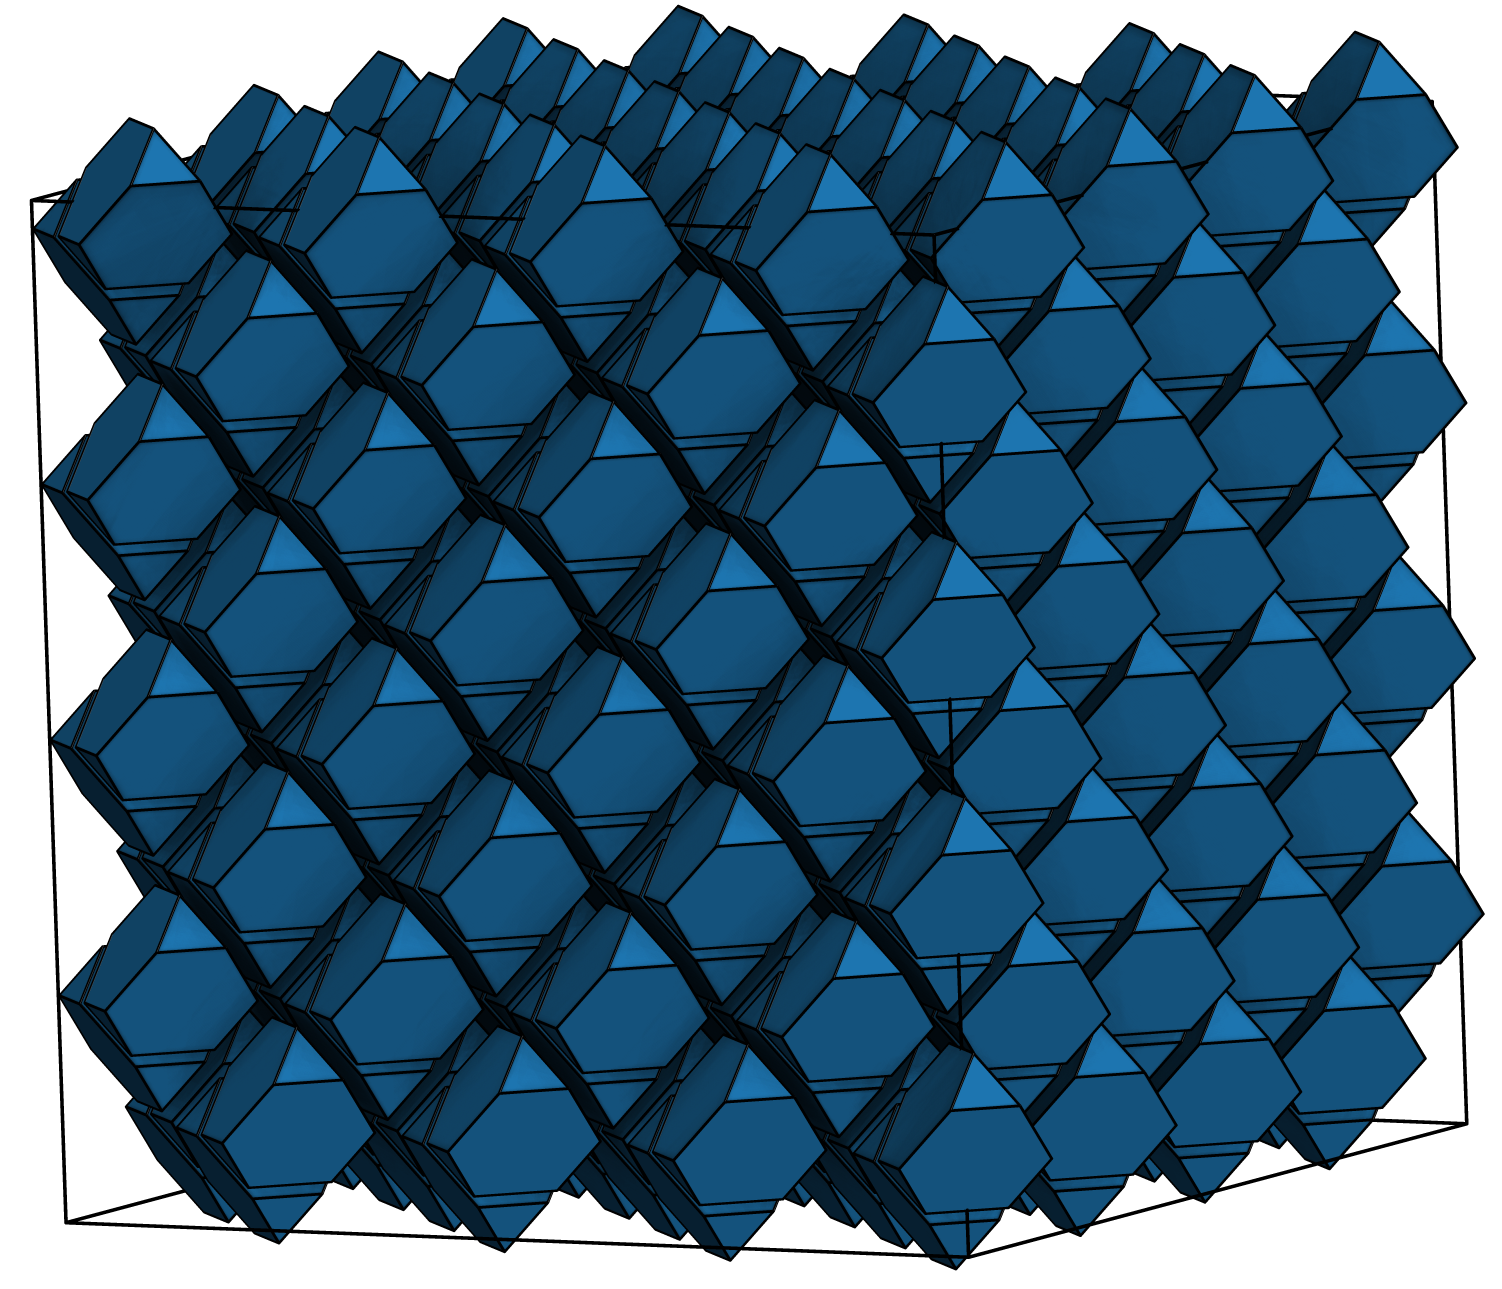 Truncated tetrahedra in a diamond structure.